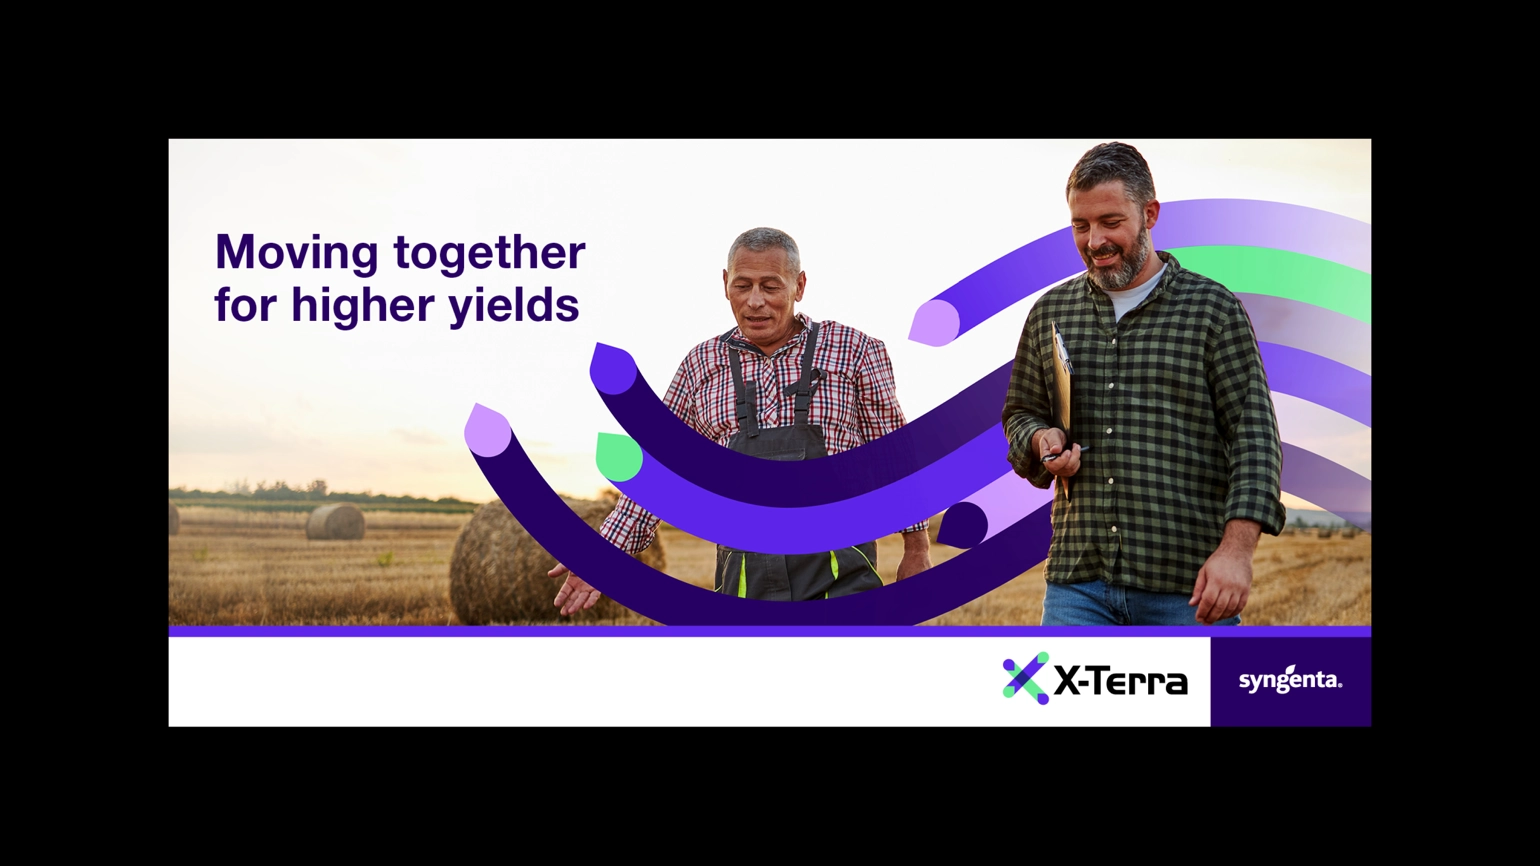 The banner of Syngenta X-terra with slogan and 2 man walking in the background 